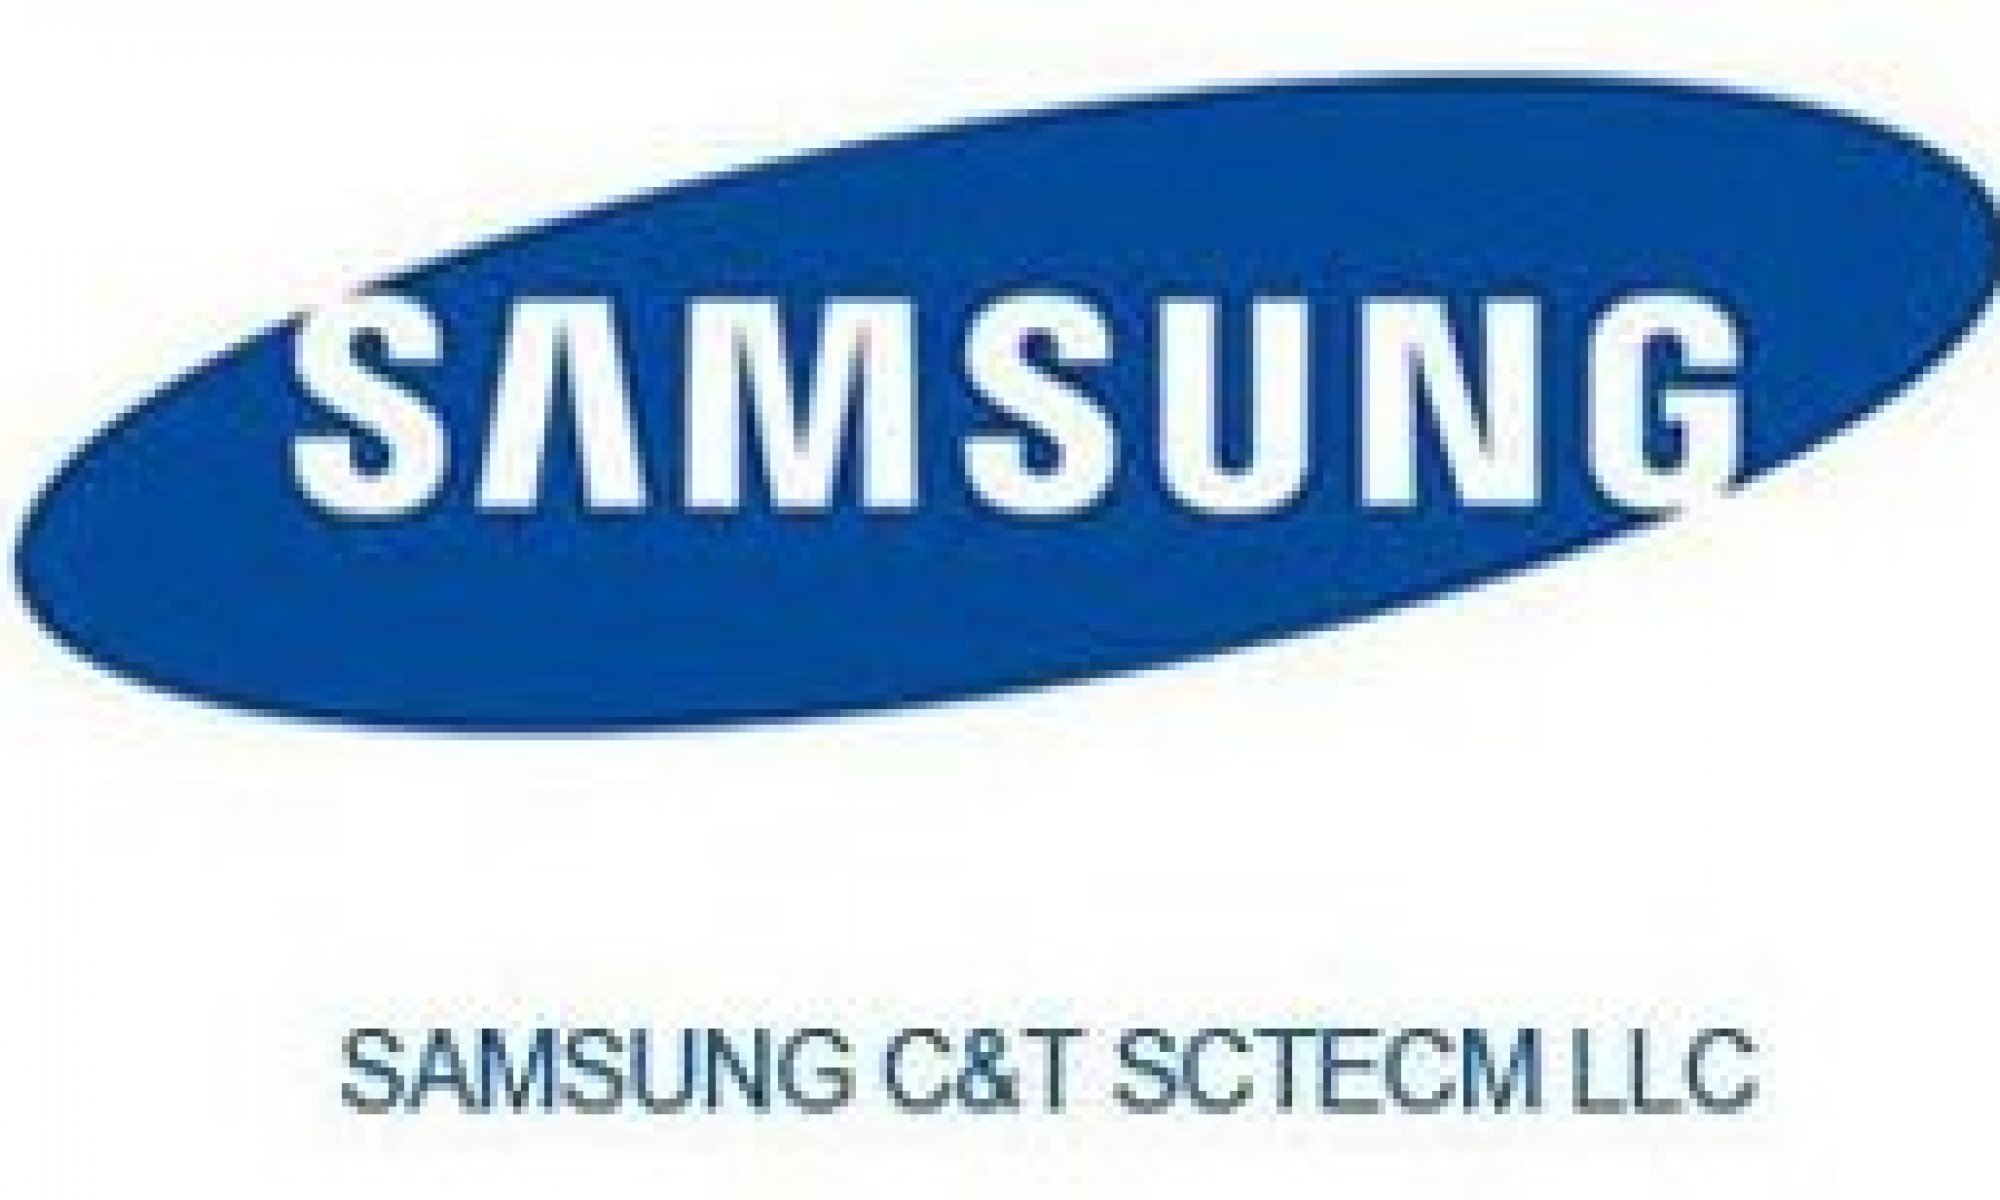 Providing catering service for samsung c&t llc’s  staffs and workers